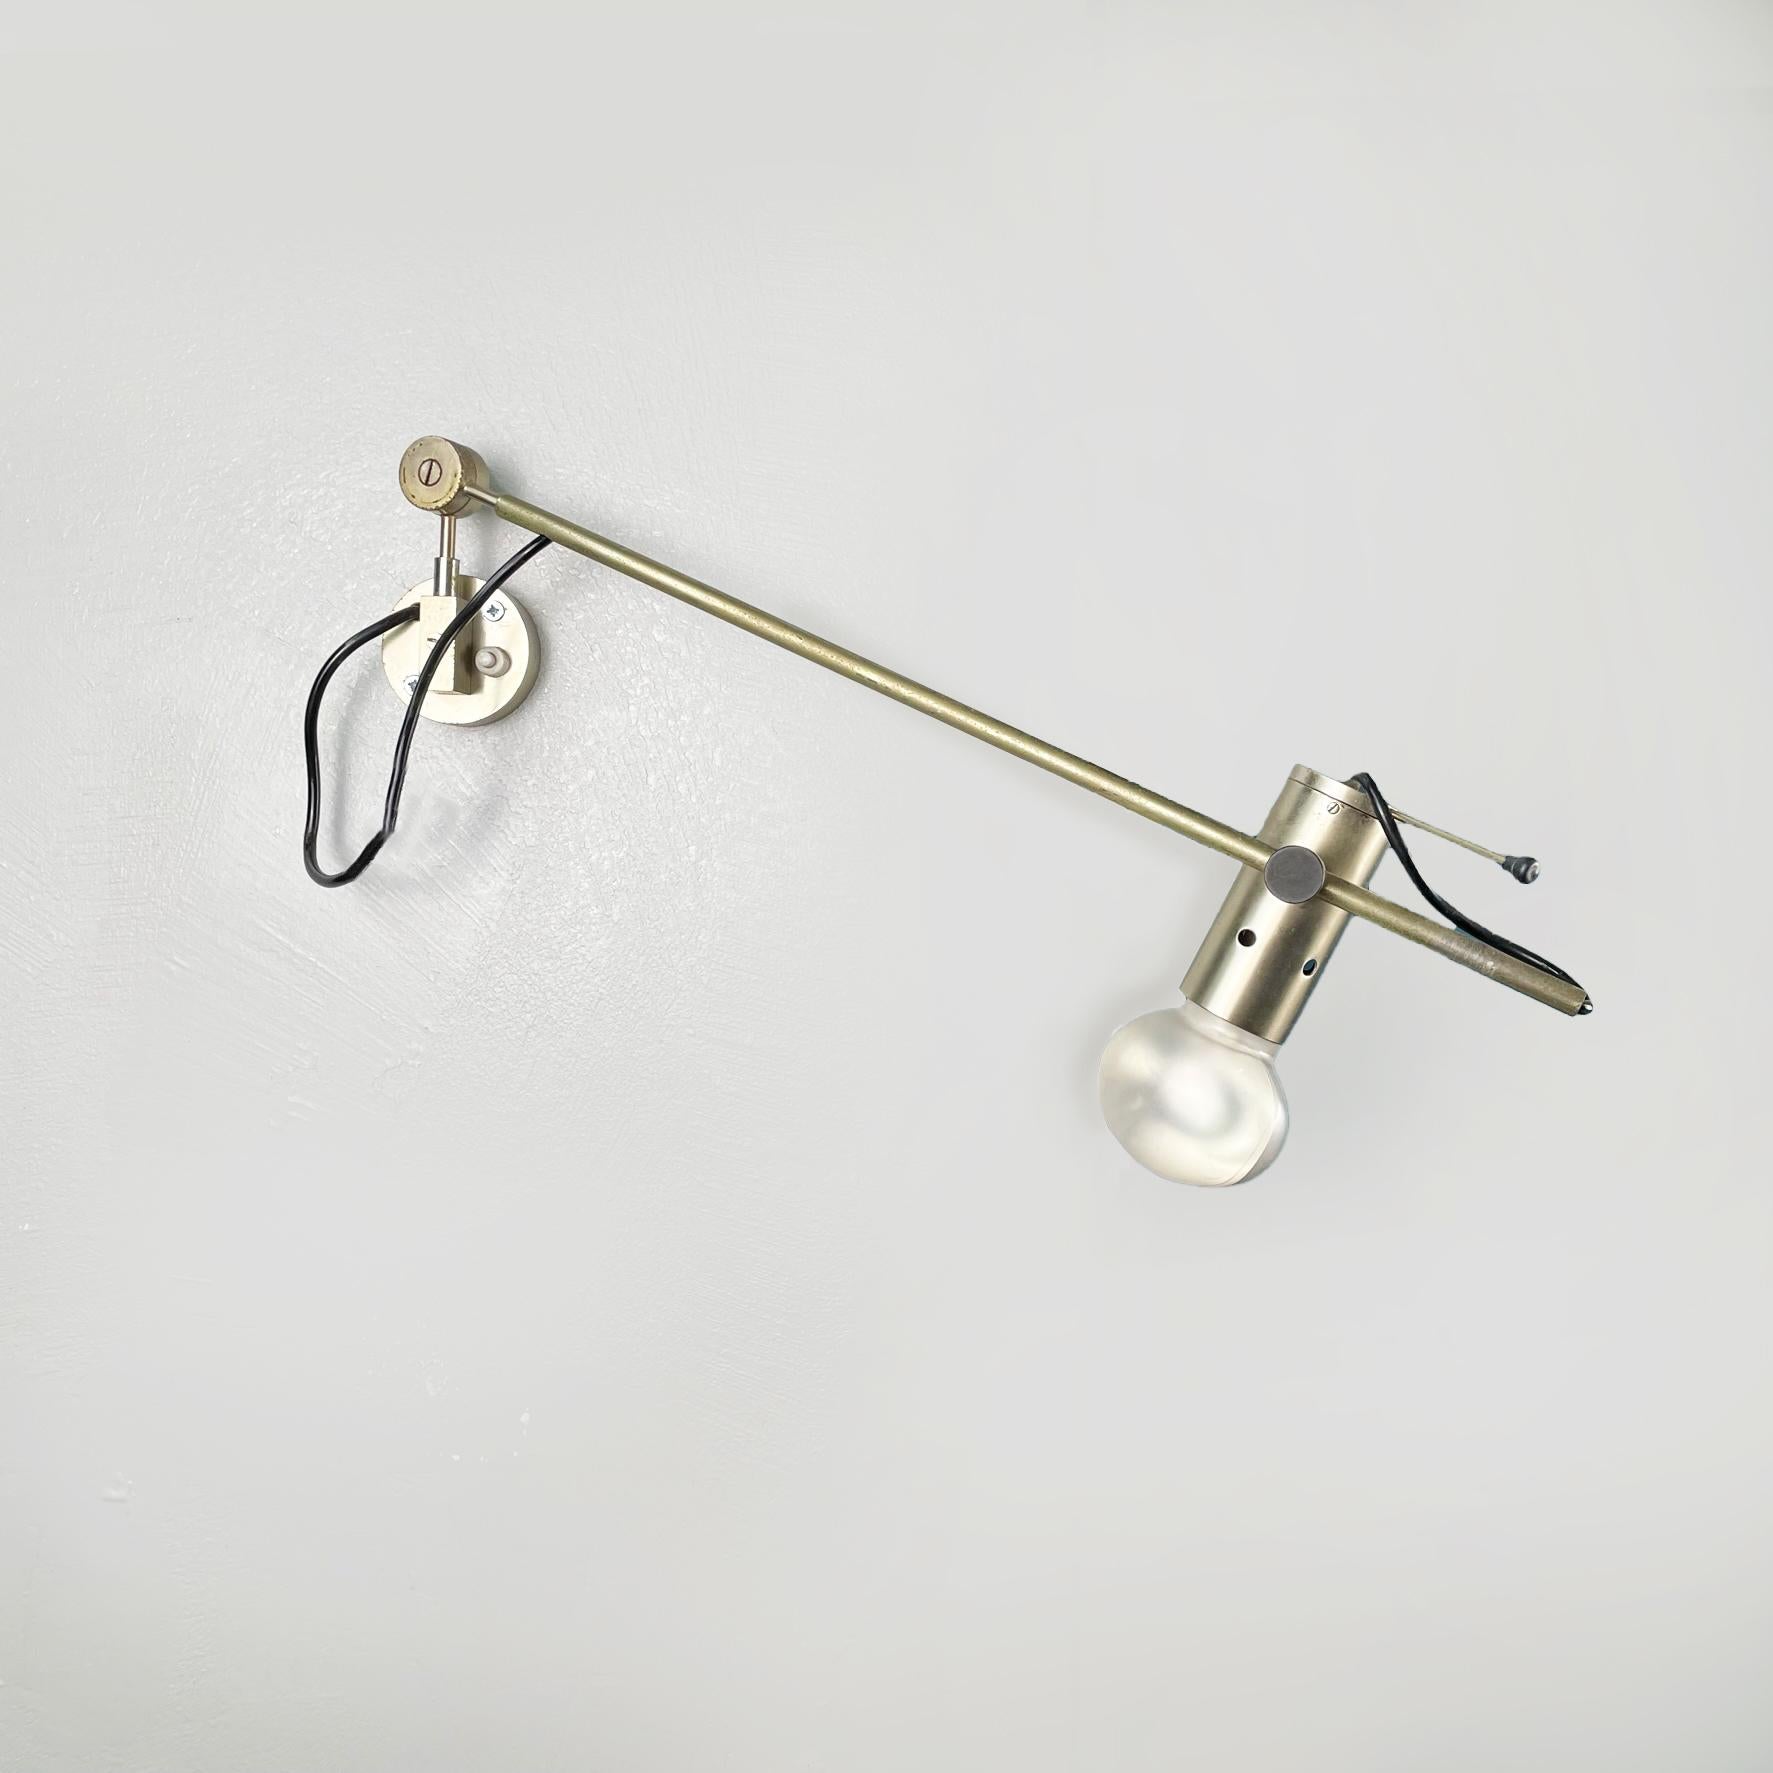 Italian mid-century Chromed metal Wall lamp by Tito Agnoli for Oluce , 1955
Wall lamp with structure composed of two adjustable arms in tubular chromed metal. The bulb-shaped diffuser is in opaline glass and metal and runs on the tubular. The lamp